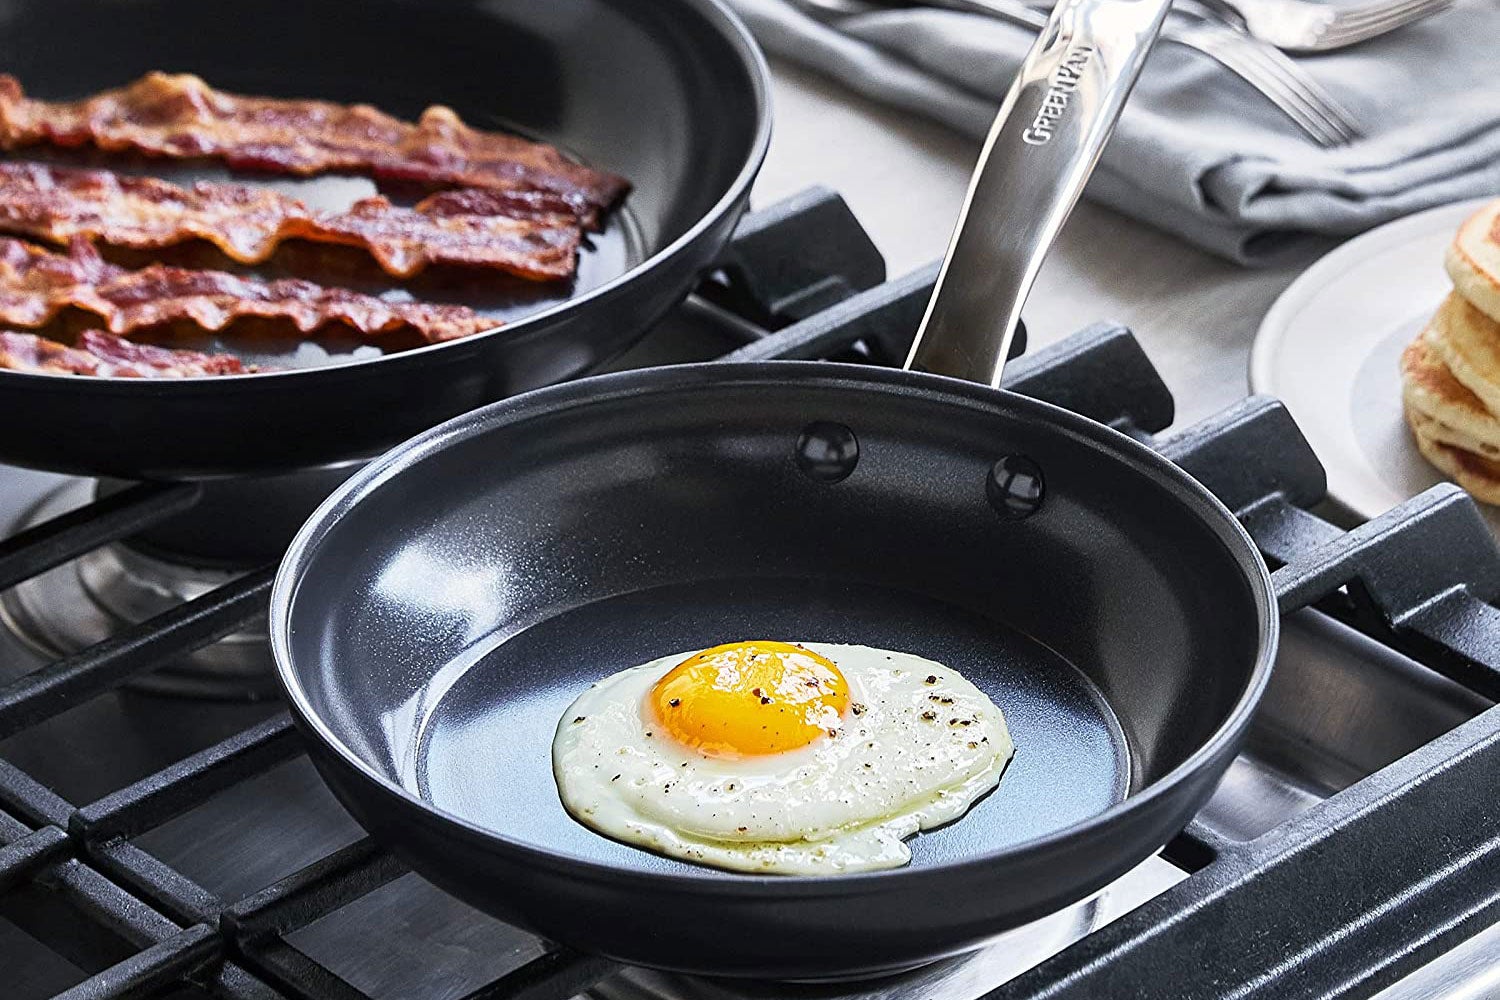 Prime Day Deal: Get This 16-Piece Cookware Set for Just $84